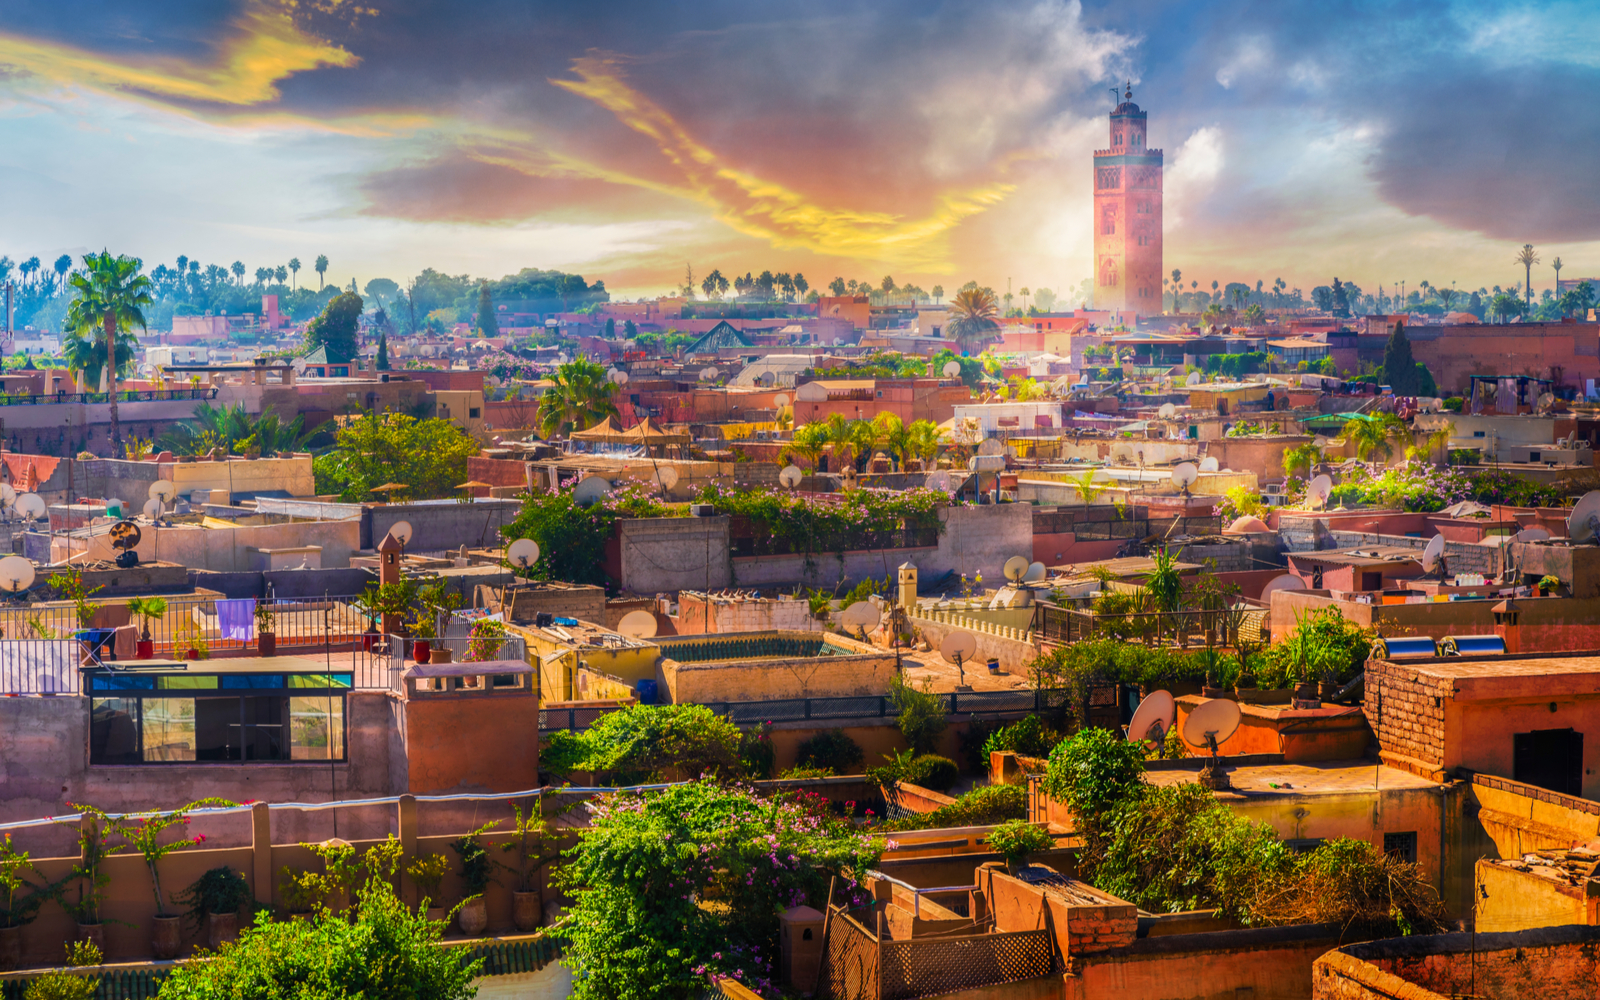 The City of Marrakech in Morocco